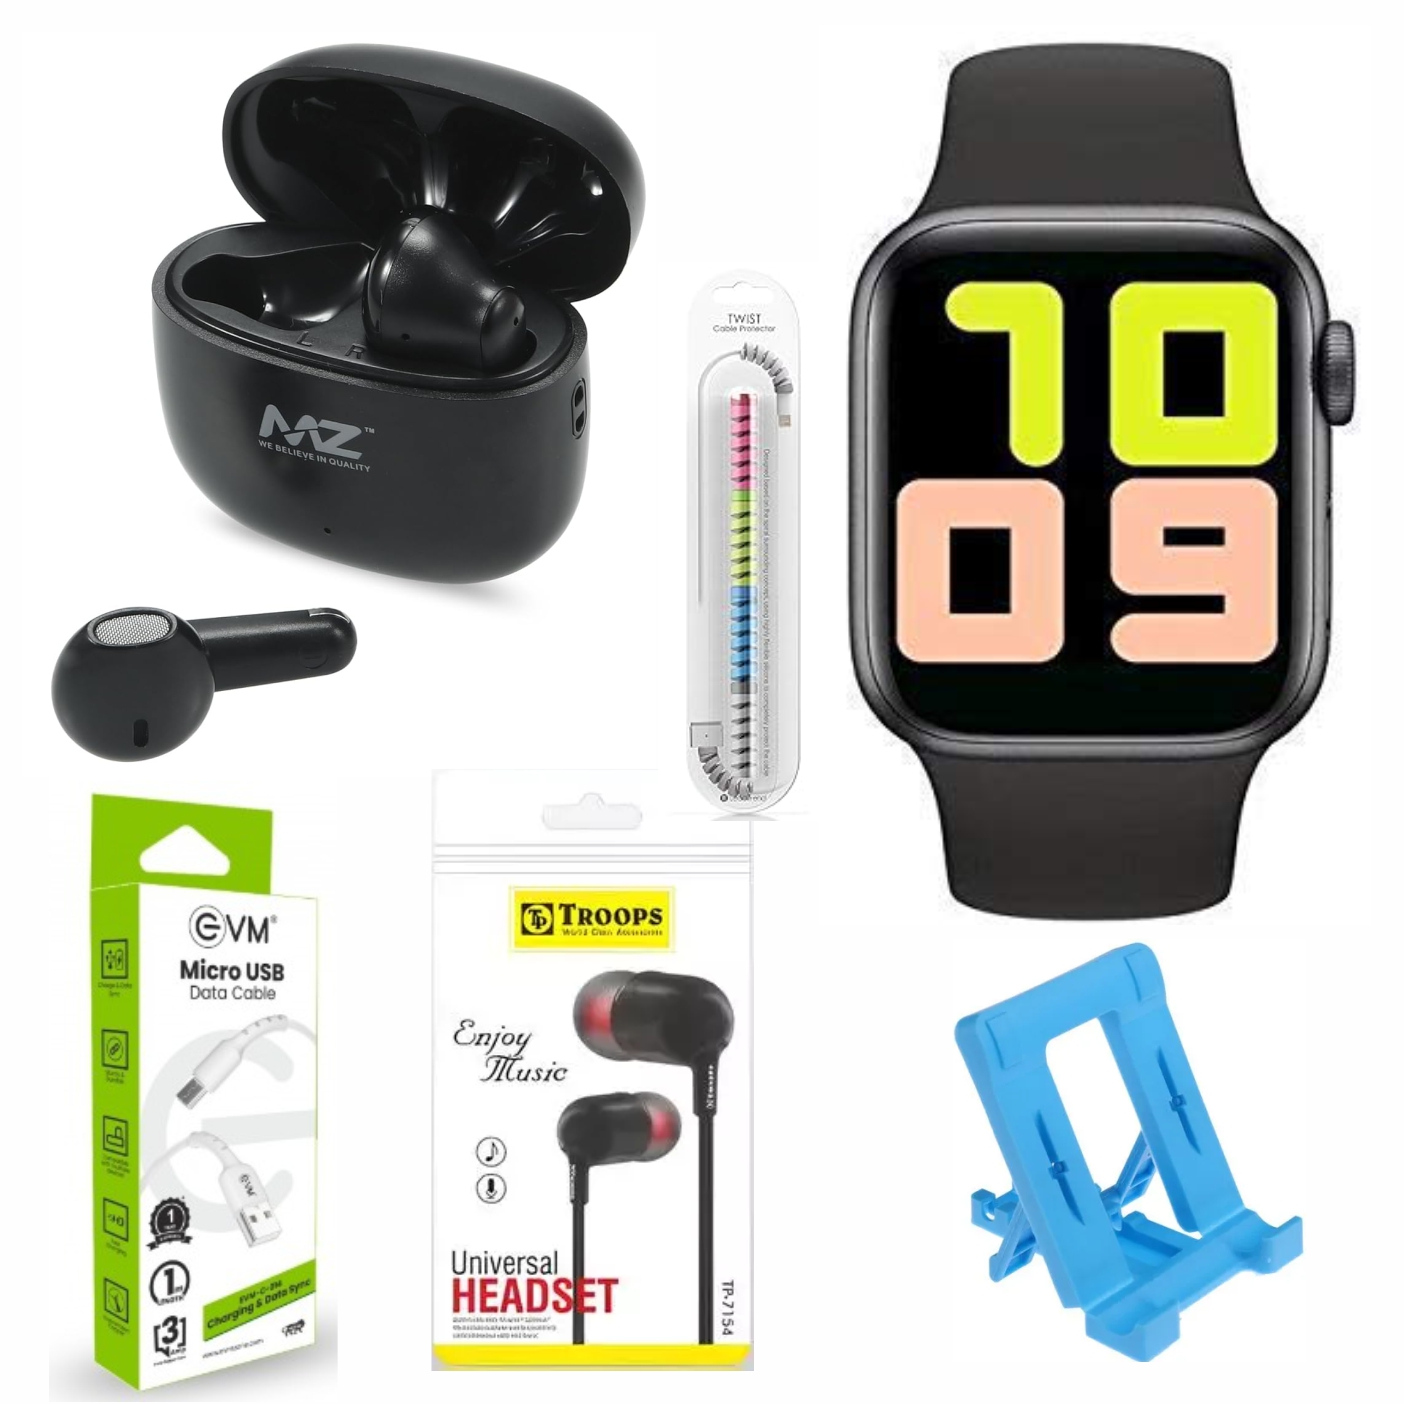 T55 Bluetooth Smartwatch / MZ Mpods 13 Wireless Earbuds / TP TROOPS Handsfree with Deep Bass / Evm Micro USB Data & Sync Cable / Spiral Cable Protector & Universal Mobile Stand, 6 in 1 combo bundle offer